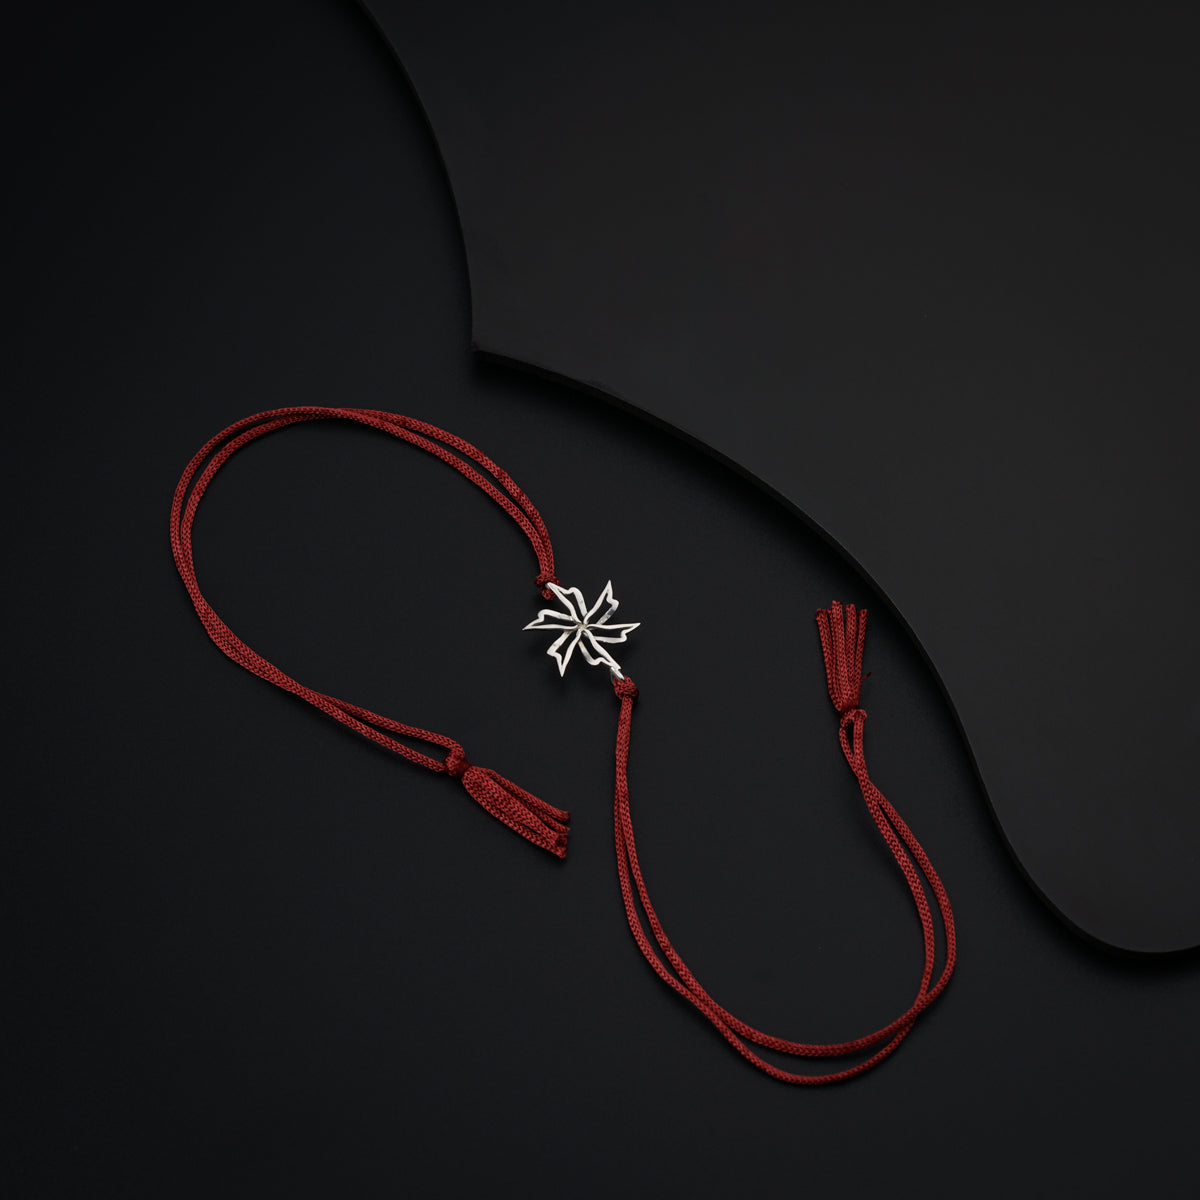 a red cord with a silver cross on it